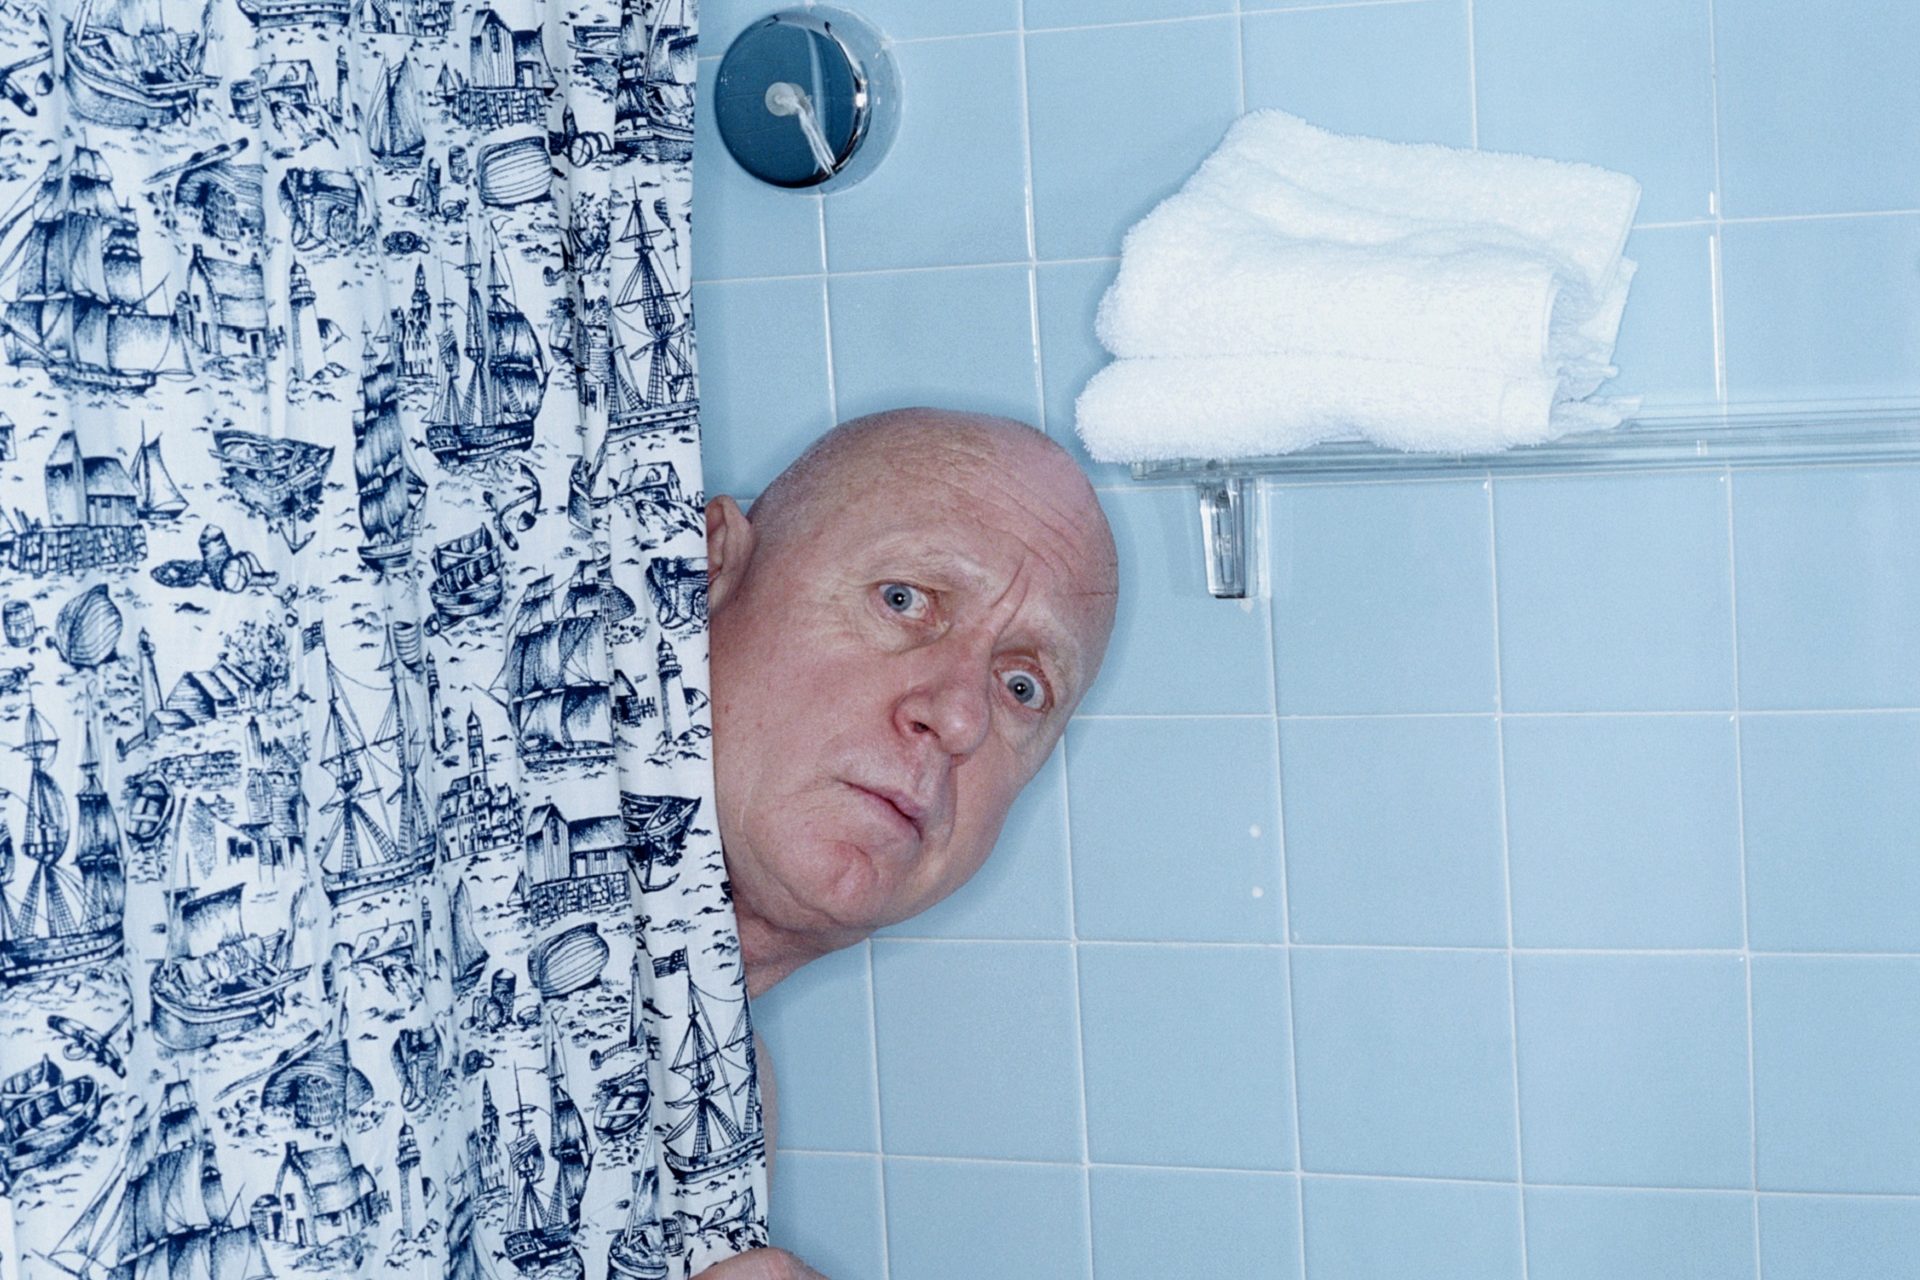 Are you guilty of relieving yourself in the shower?